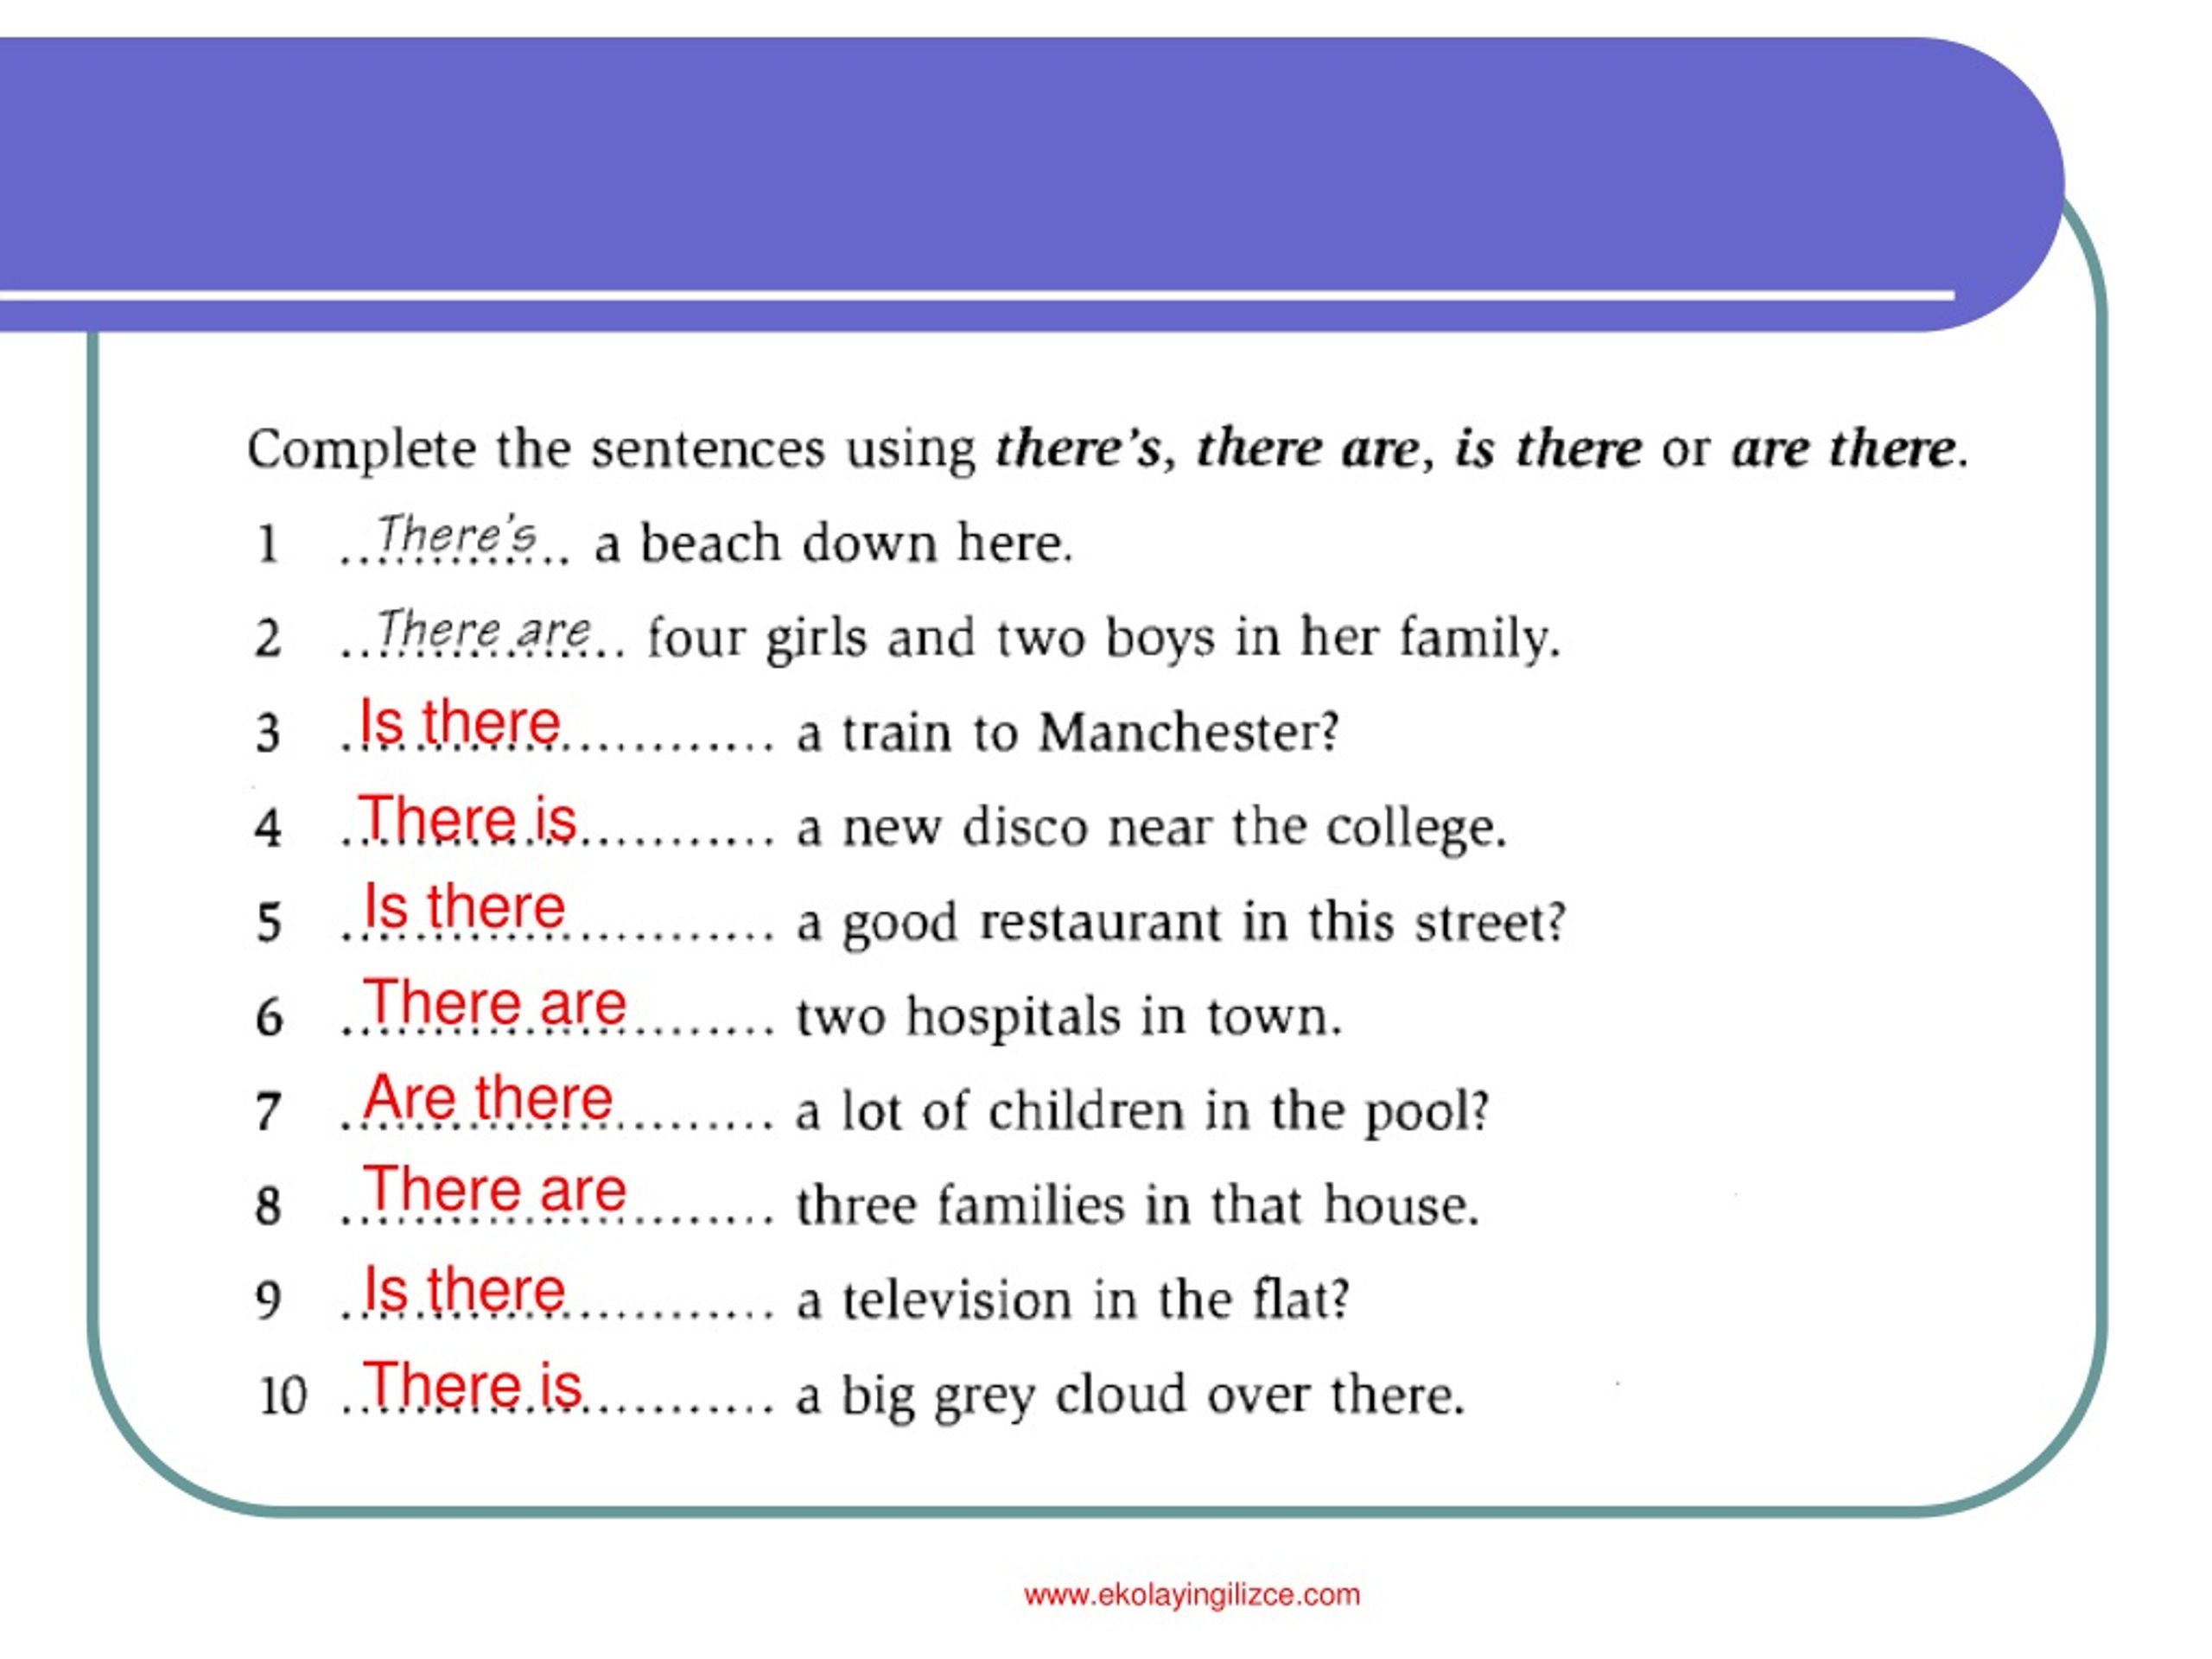 Complete sentences using new words and. There is there are. There is there are вопросы и ответы. Вставить there is there are. There is there are sentences.